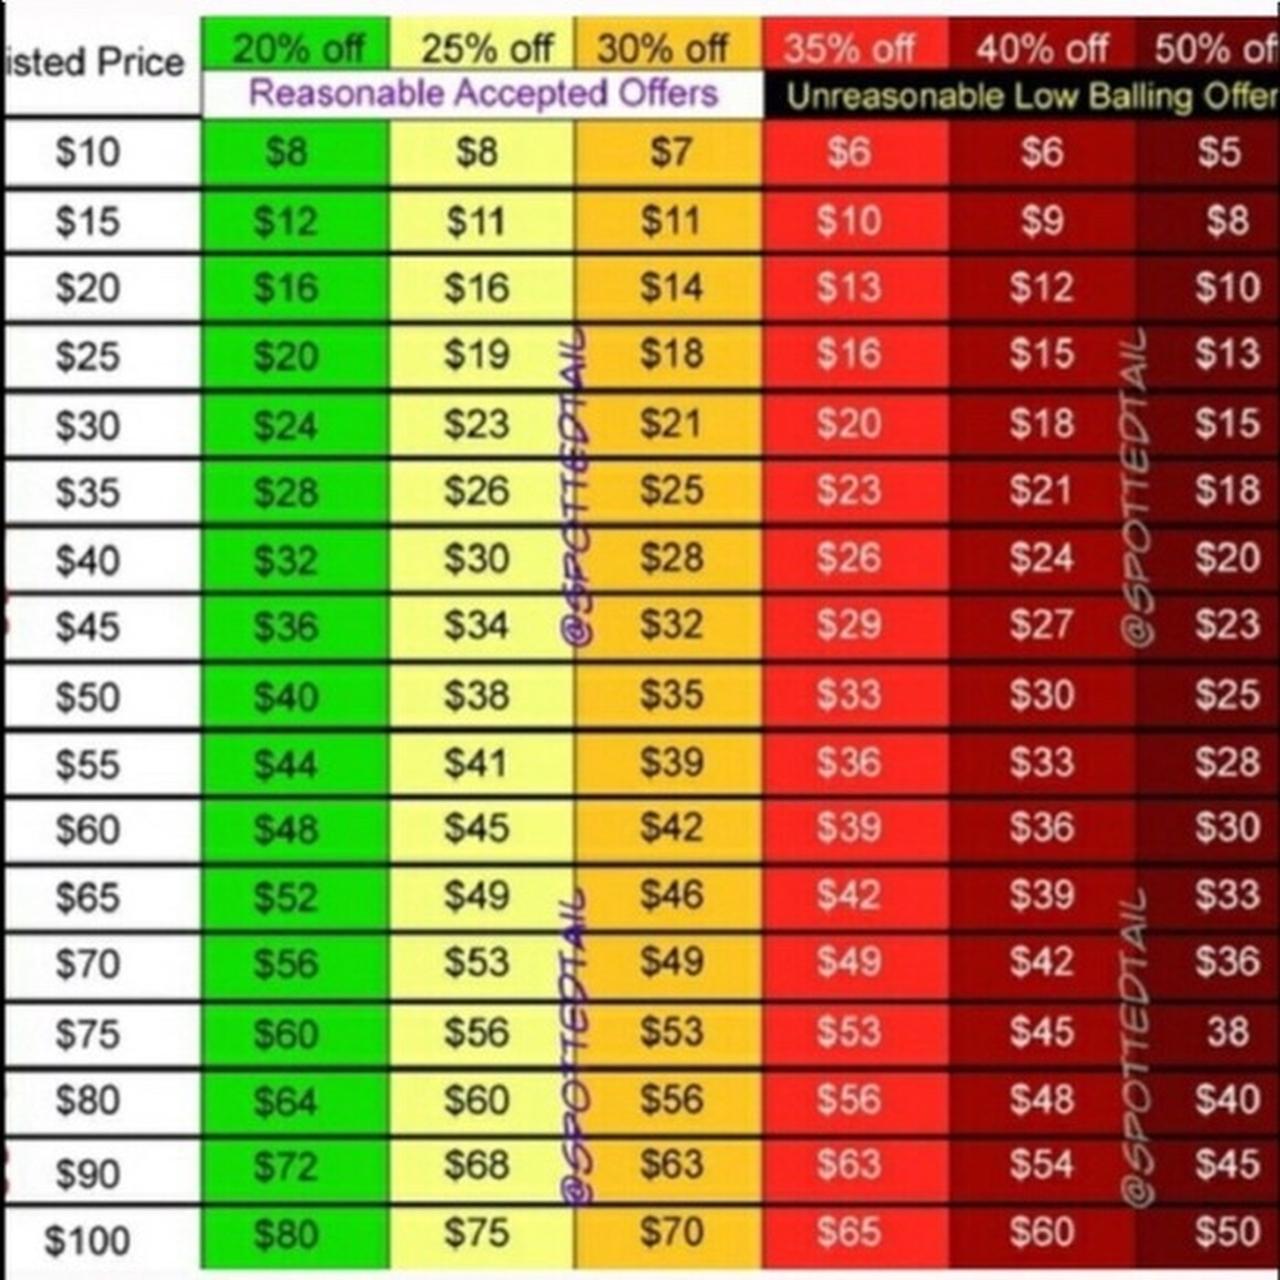 A price offer chart cause some of you guys are so - Depop